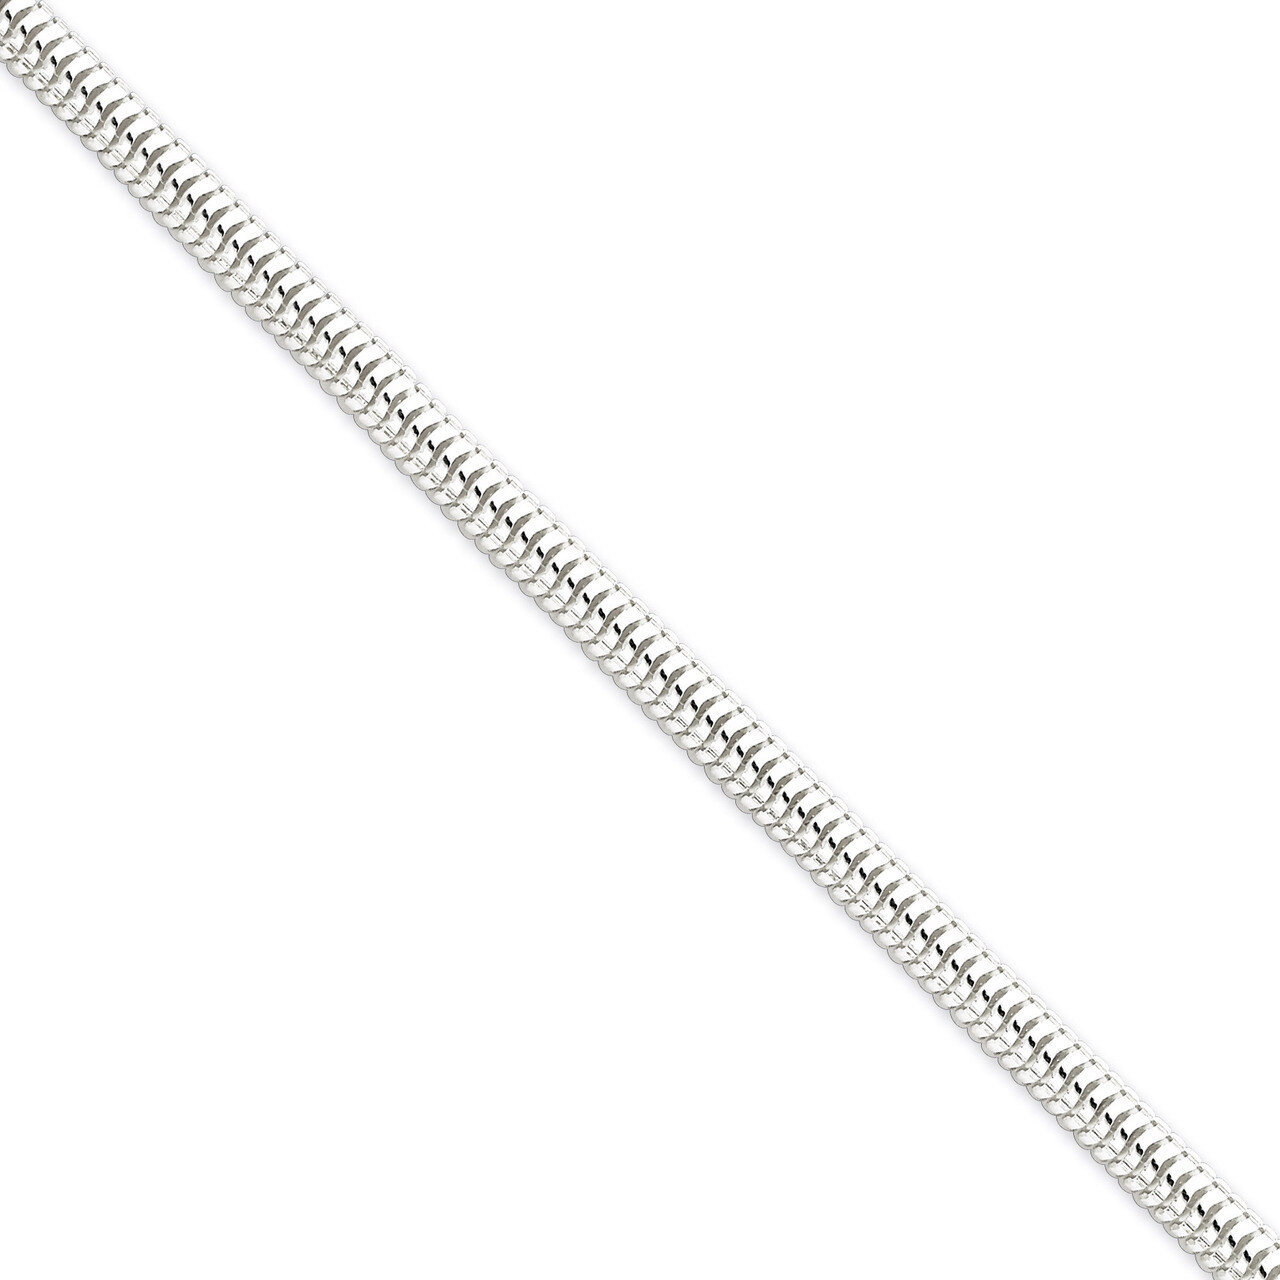 7 Inch 4.00mm Round Snake Chain Sterling Silver QSNL100-7